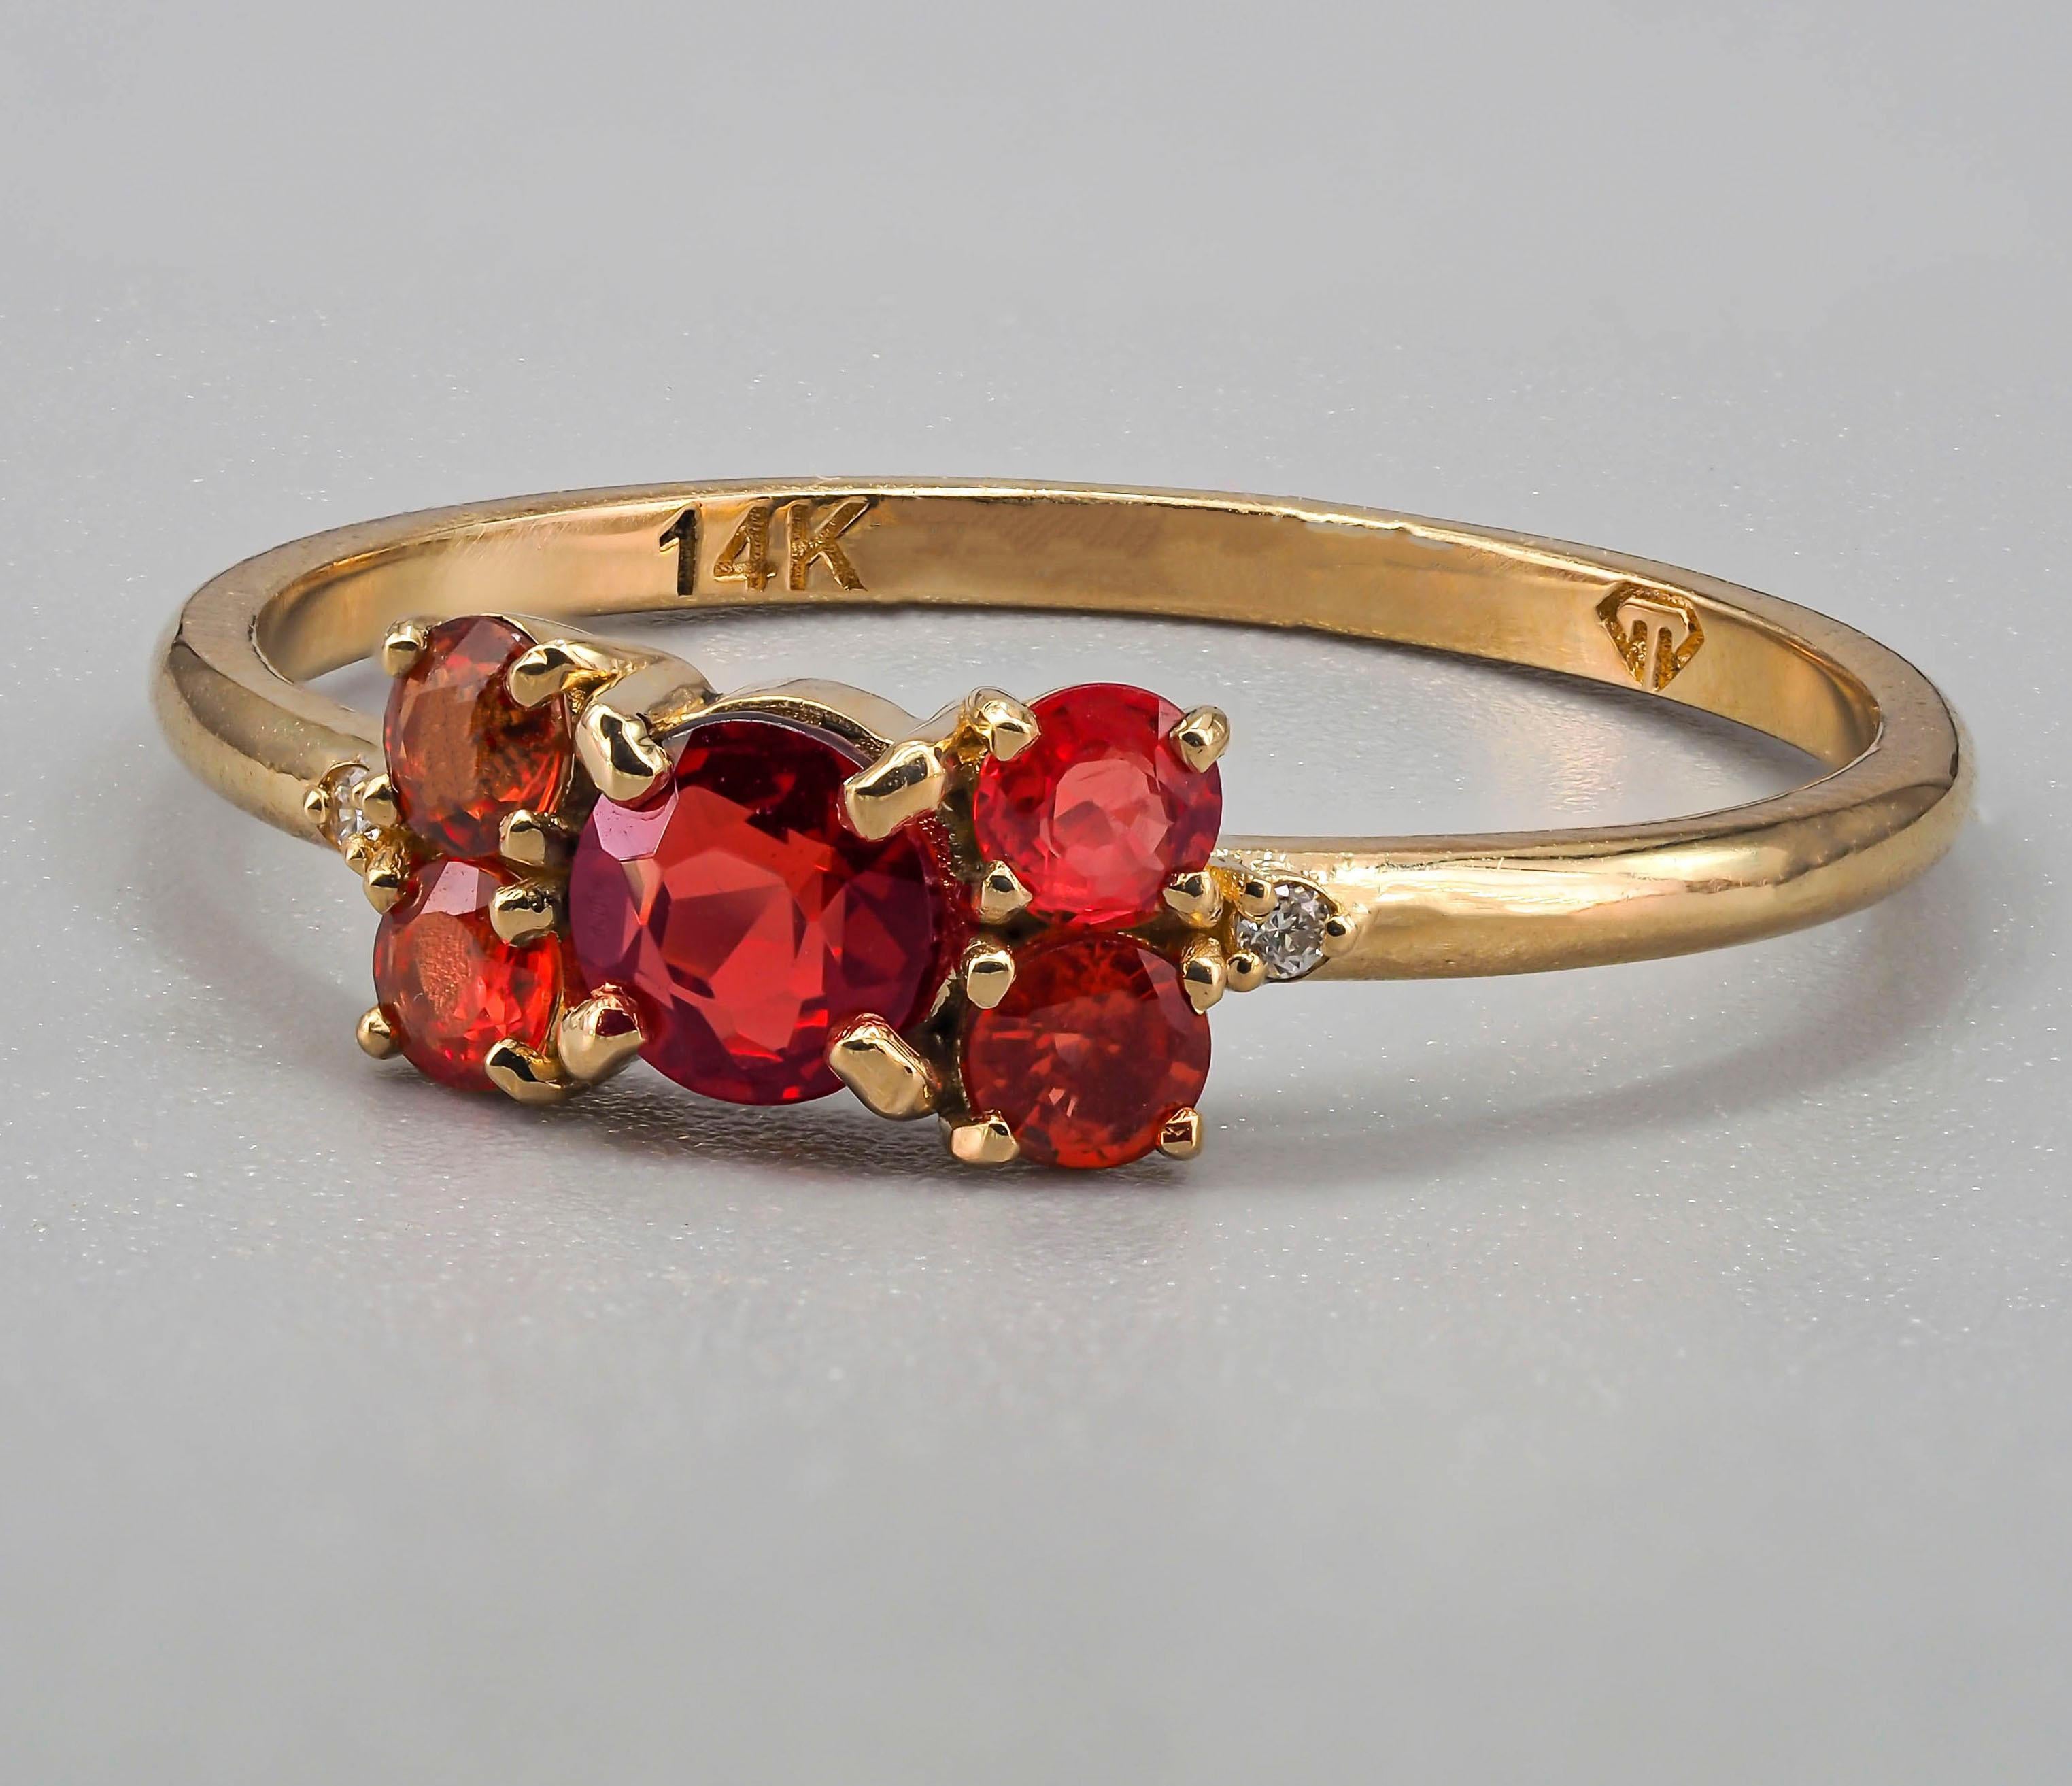 Round garnet 14k gold ring. 
January birthstone ring. Delicate garnet ring. Minimalist garnet ring. Red gemstone ring. Dainty garnet ring.

Metal: 14k gold
Weight: 1.6 g. depends from size.

Central stone: garnet
Cut: round
Weight: aprx 0.5